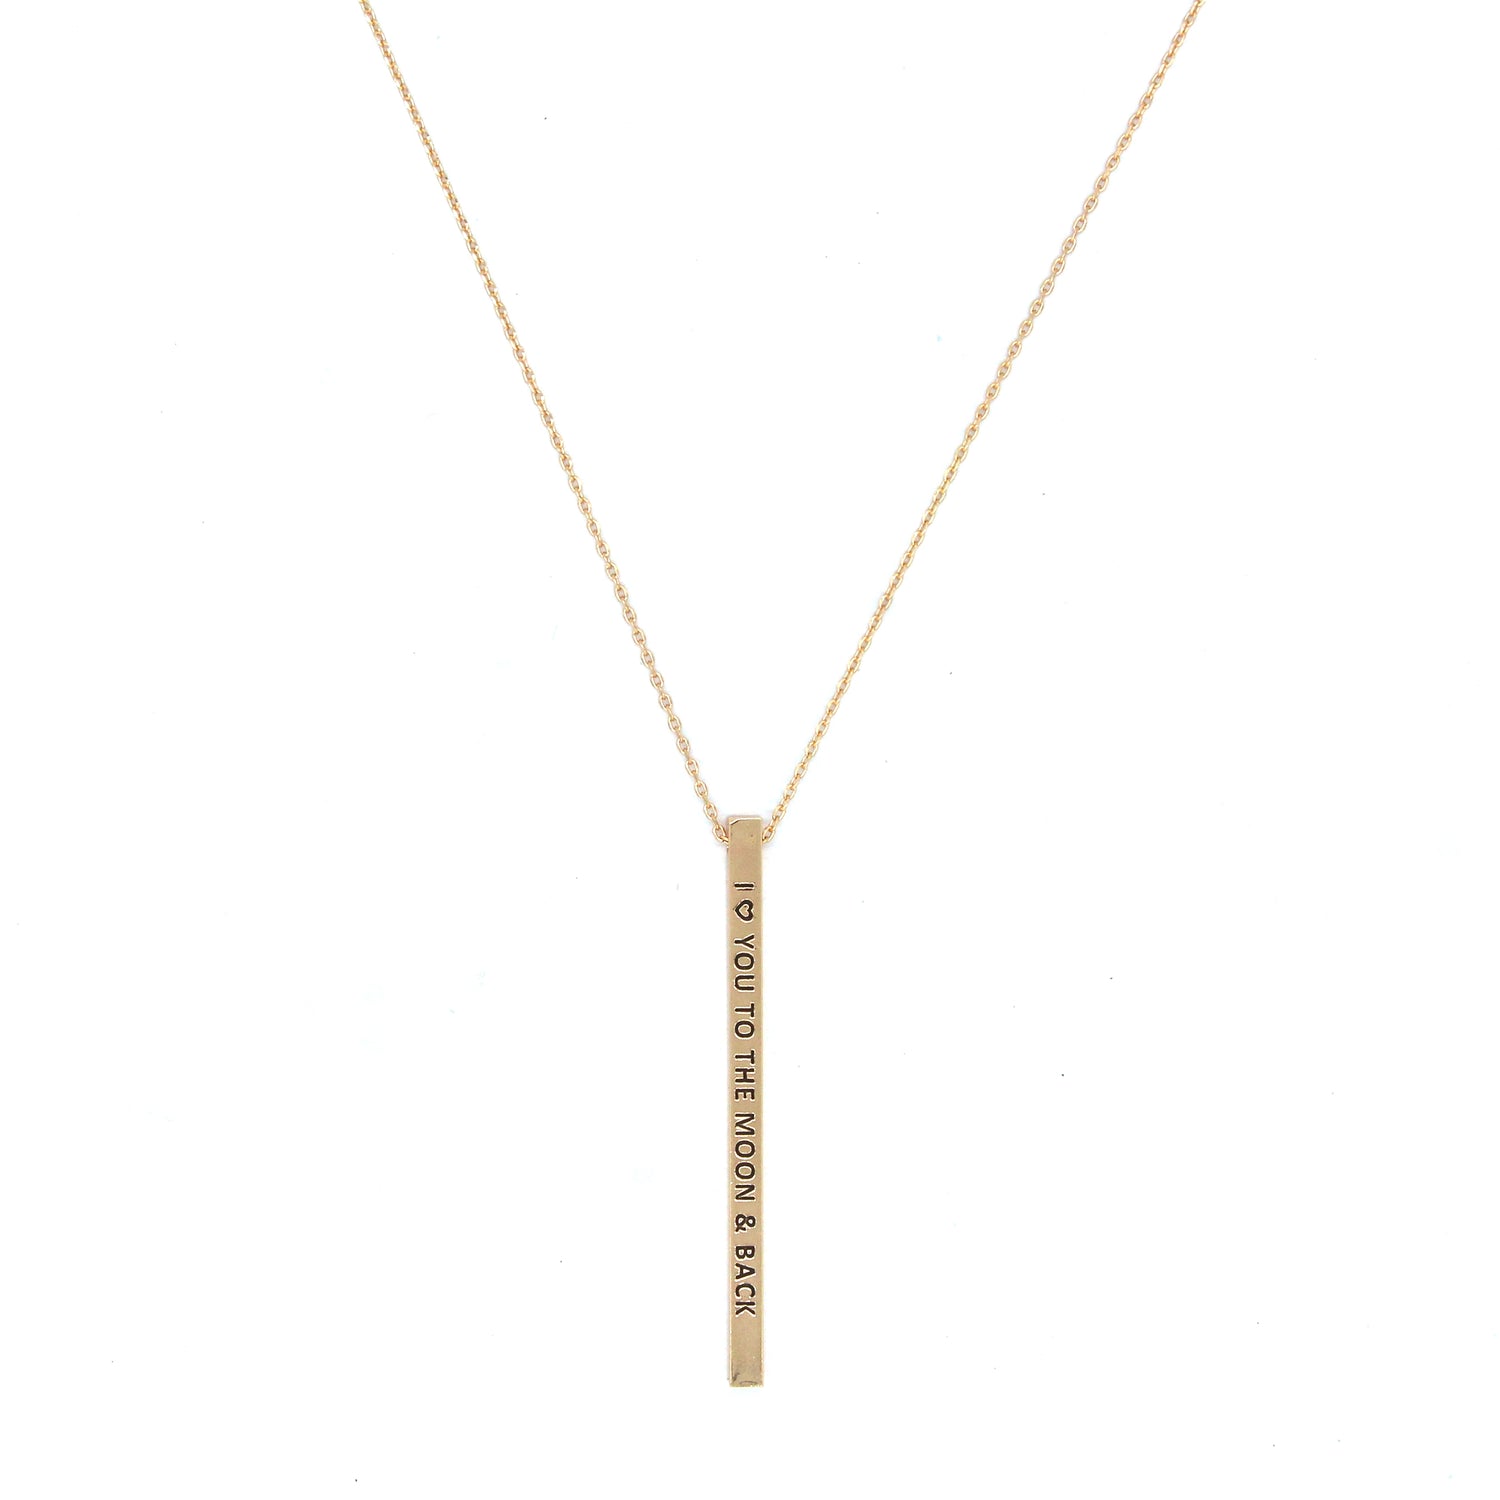 I LOVE YOU TO THE MOON & BACK Engraved Bar Necklace- Gold